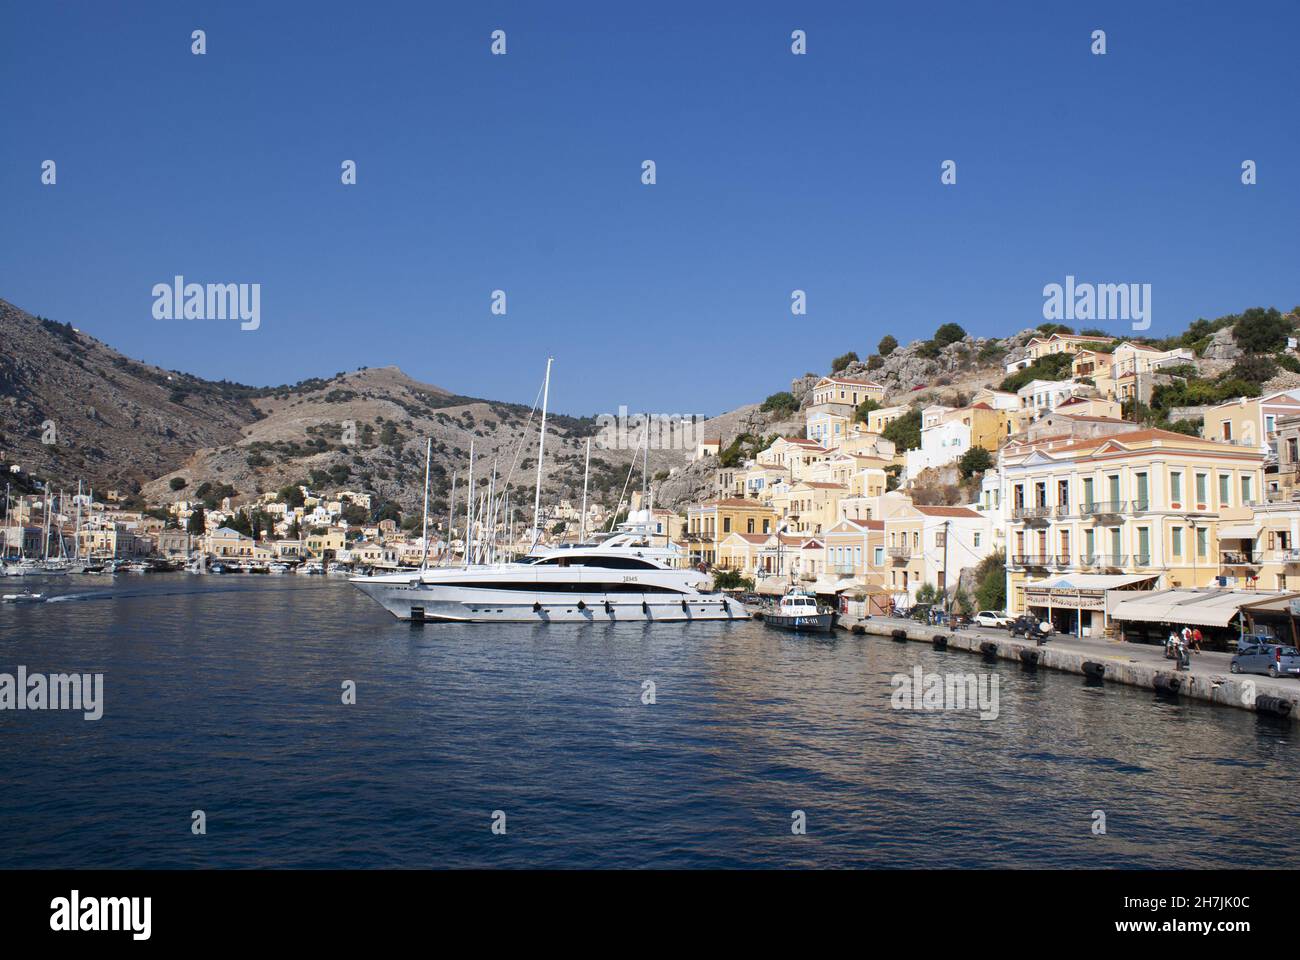 Symi island - Greece - August 19 2009 :  Beautiful harbor scene with bustling colorful waterfront.  Elegant houses line the busy harbor. Landscape asp Stock Photo